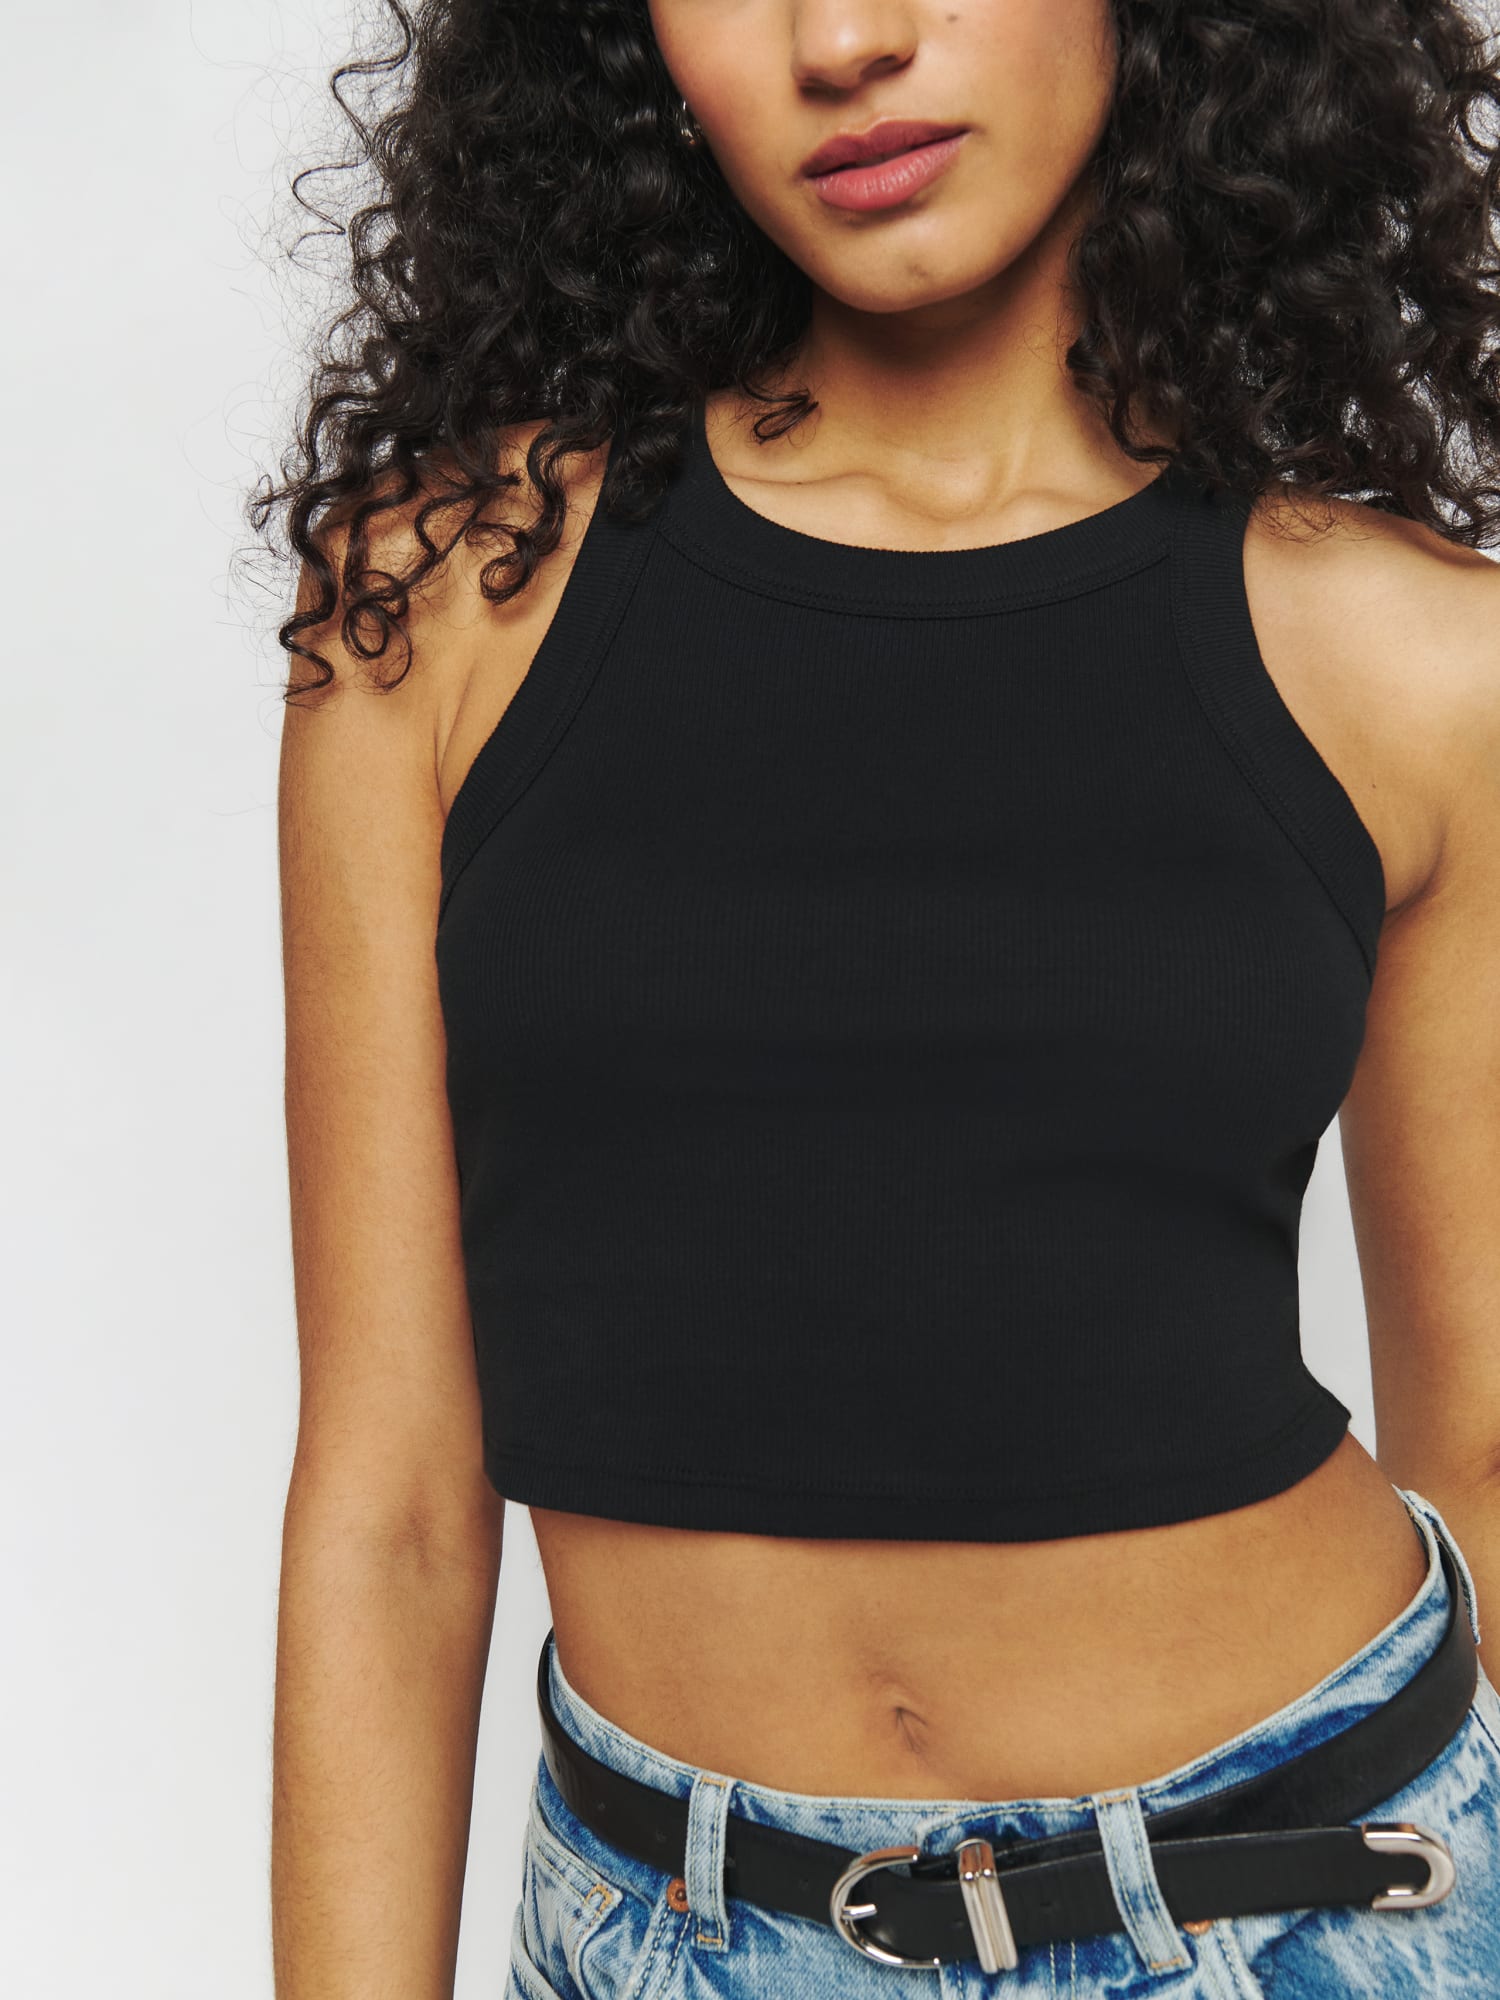 Chic and Sophisticated Black Tweed Cropped Tank Top